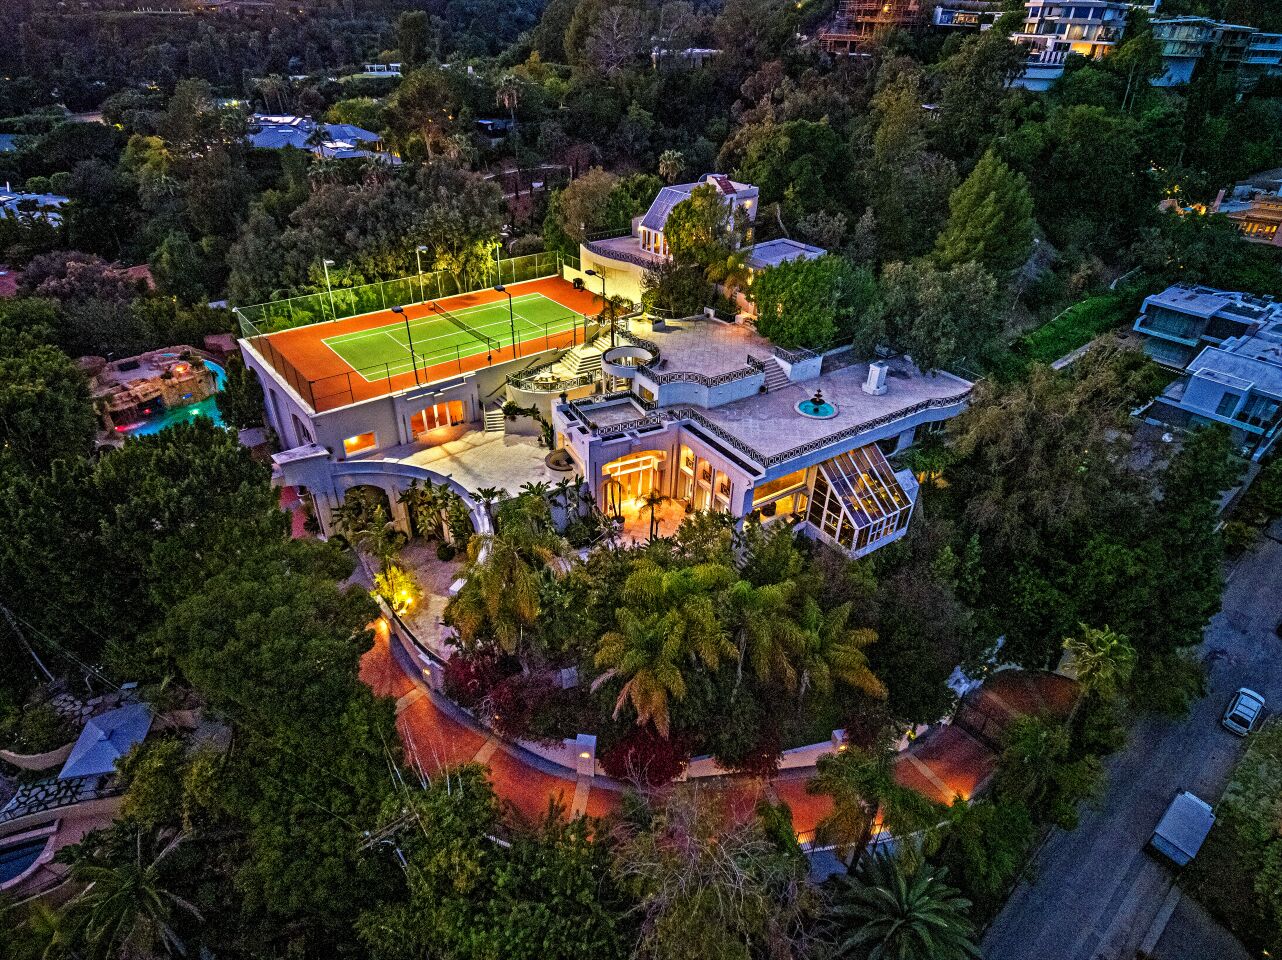 Built by contractor and noted playboy Hal B. Hayes in the 1950s, the 18,000-square-foot mansion was built to withstand a nuclear blast and features a sealed underground cave accessed by an underwater tunnel. In the 2000s, the home was owned by former NBA player Carlos Boozer, who leased the property to the late pop star Prince. It's now for sale at about $30 million. Boozer later sued Prince for damages after the pop star renovated the home and added a heart-shaped bed in the master bedroom as well as a hair salon in a spare bedroom. Italian carpets were replaced with shades of purple and black. (The Oppenheim Group)